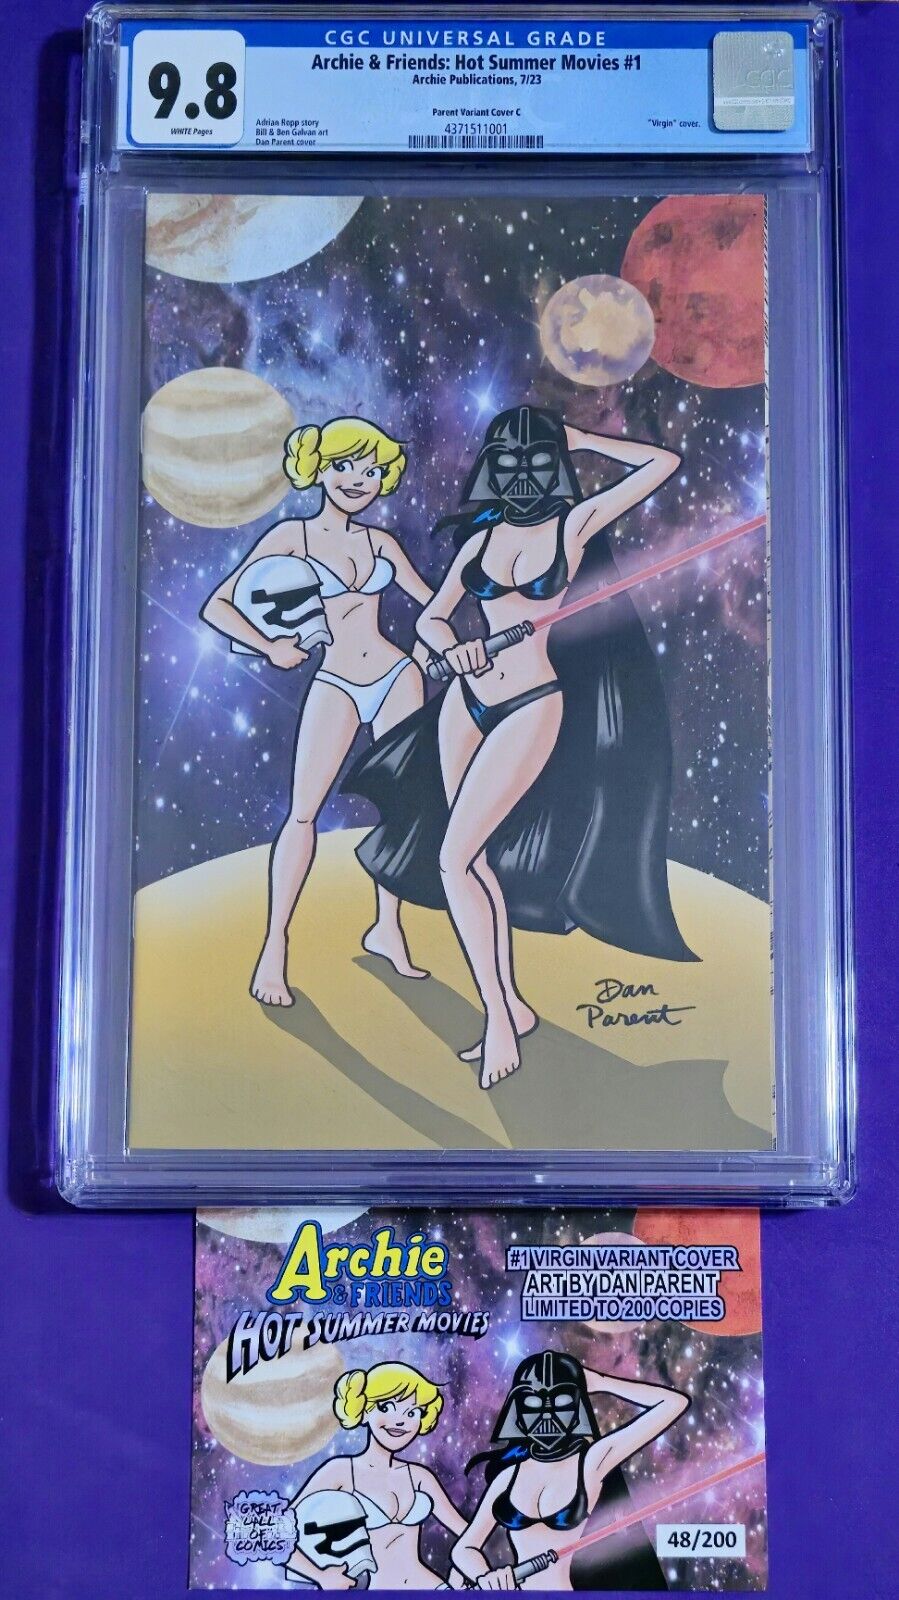 Archie & Friends #1 Hot Summer Movies May the 4th Be With You 48/200 cgc 9.8